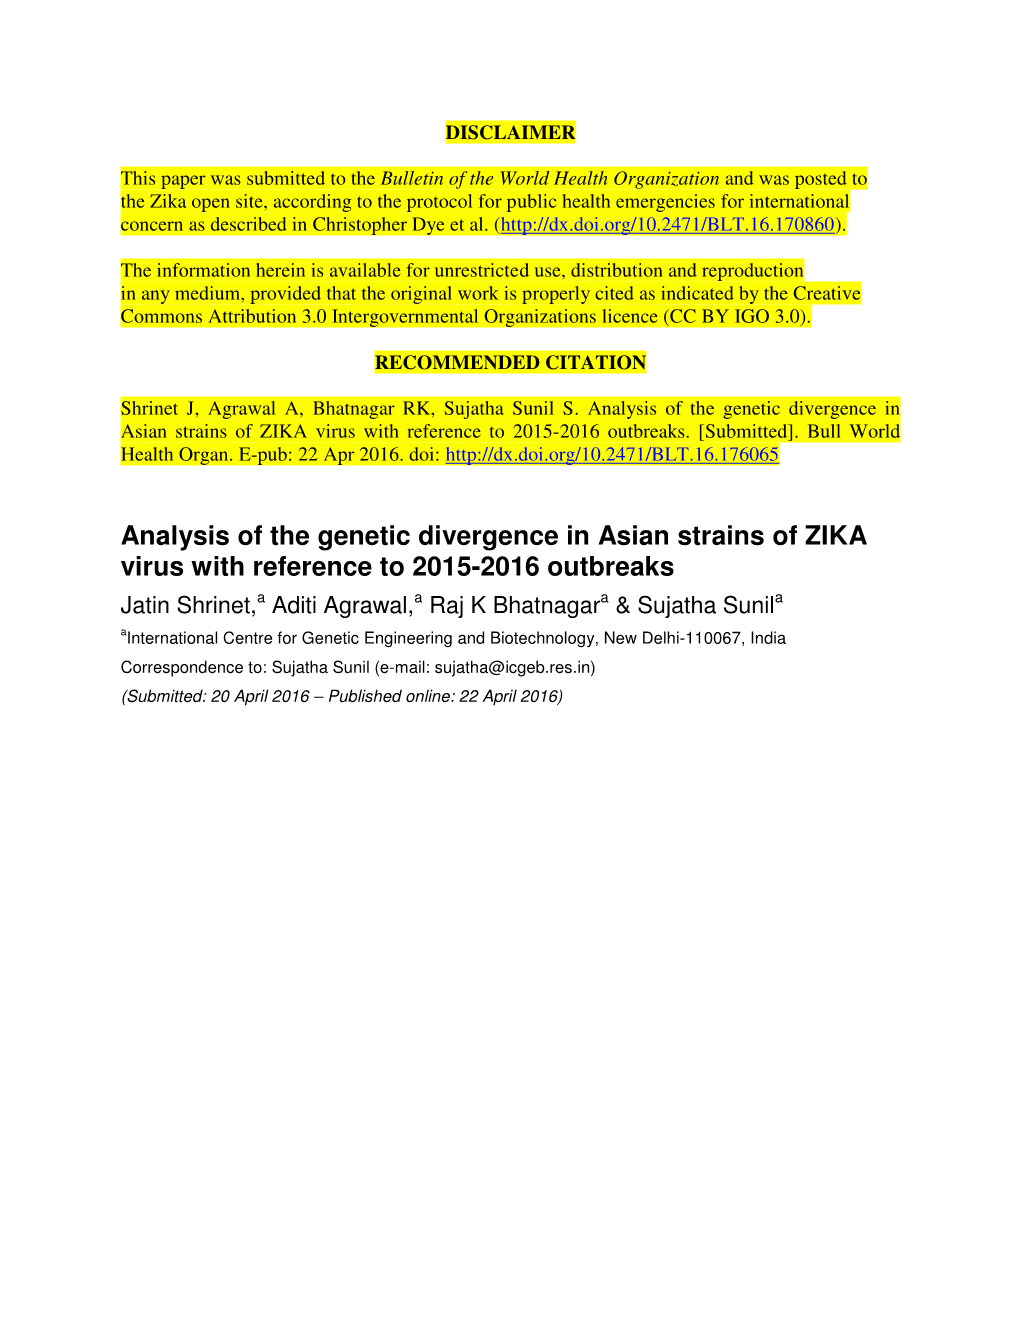 Analysis of the Genetic Divergence in Asian Strains of ZIKA Virus with Reference to 2015-2016 Outbreaks